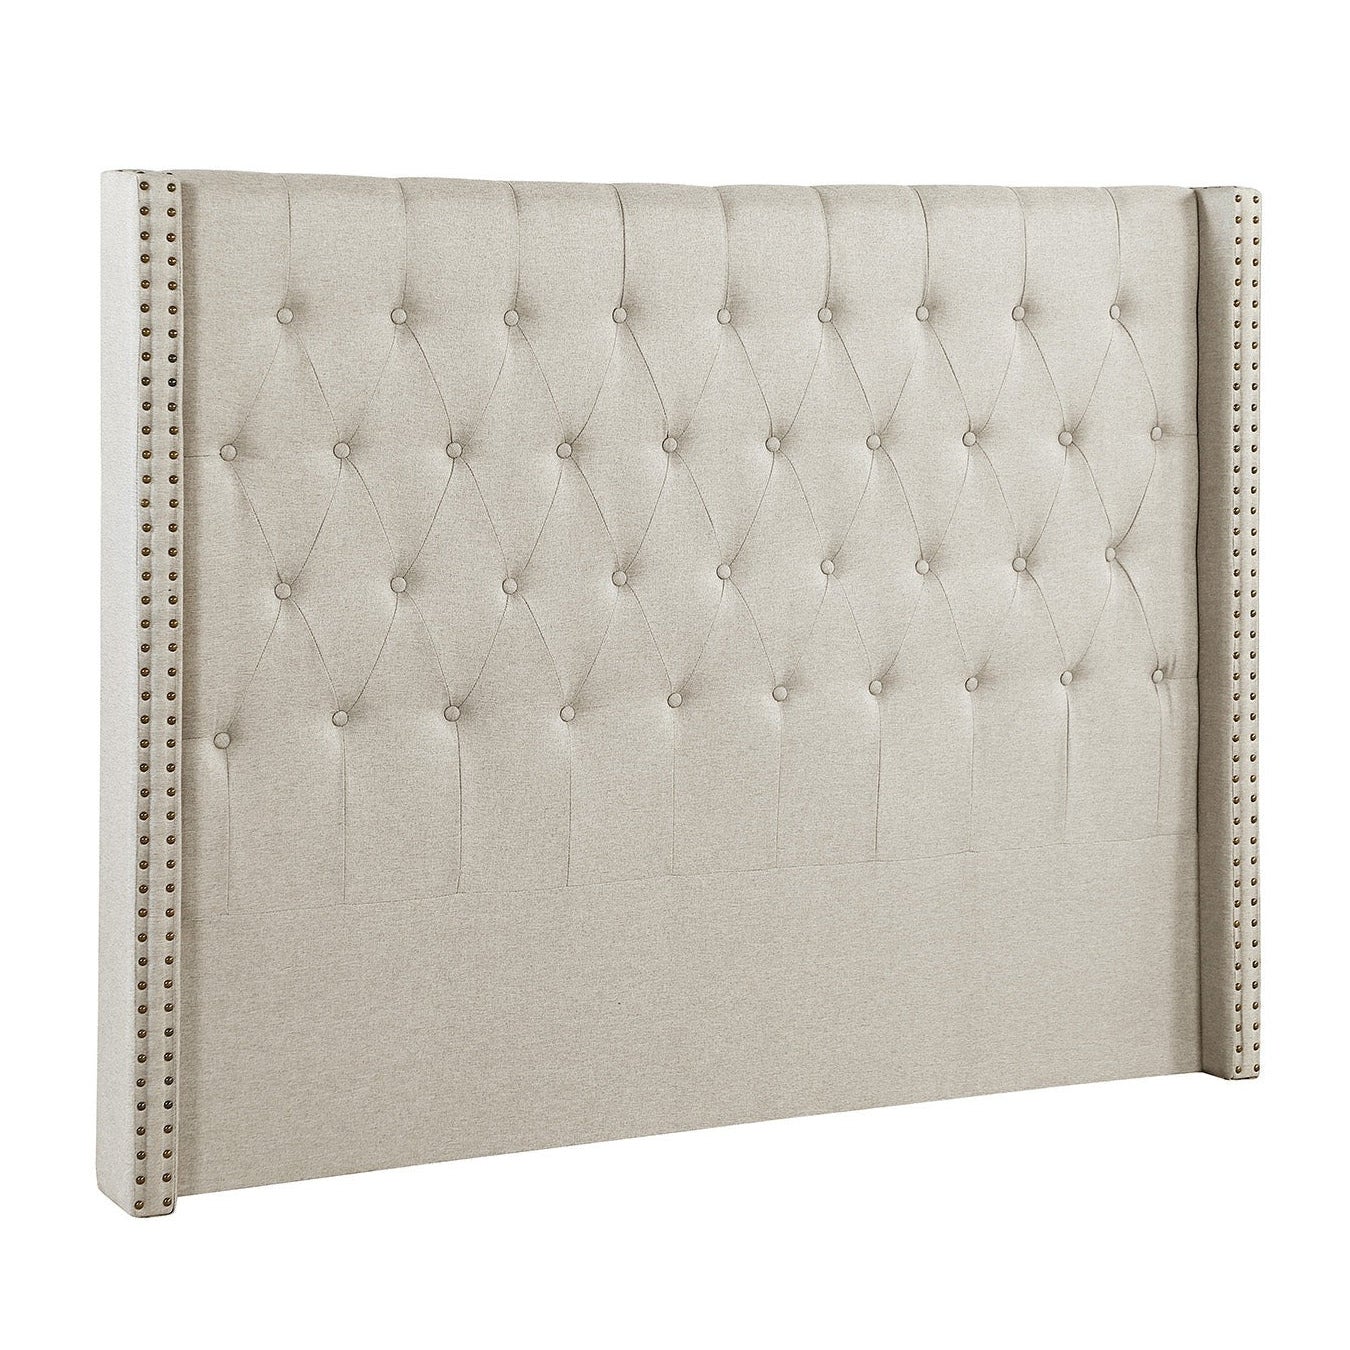 Foret Bed Head Queen Size Headboard Bedhead Frame Base Stud Tufted Fabric Cream